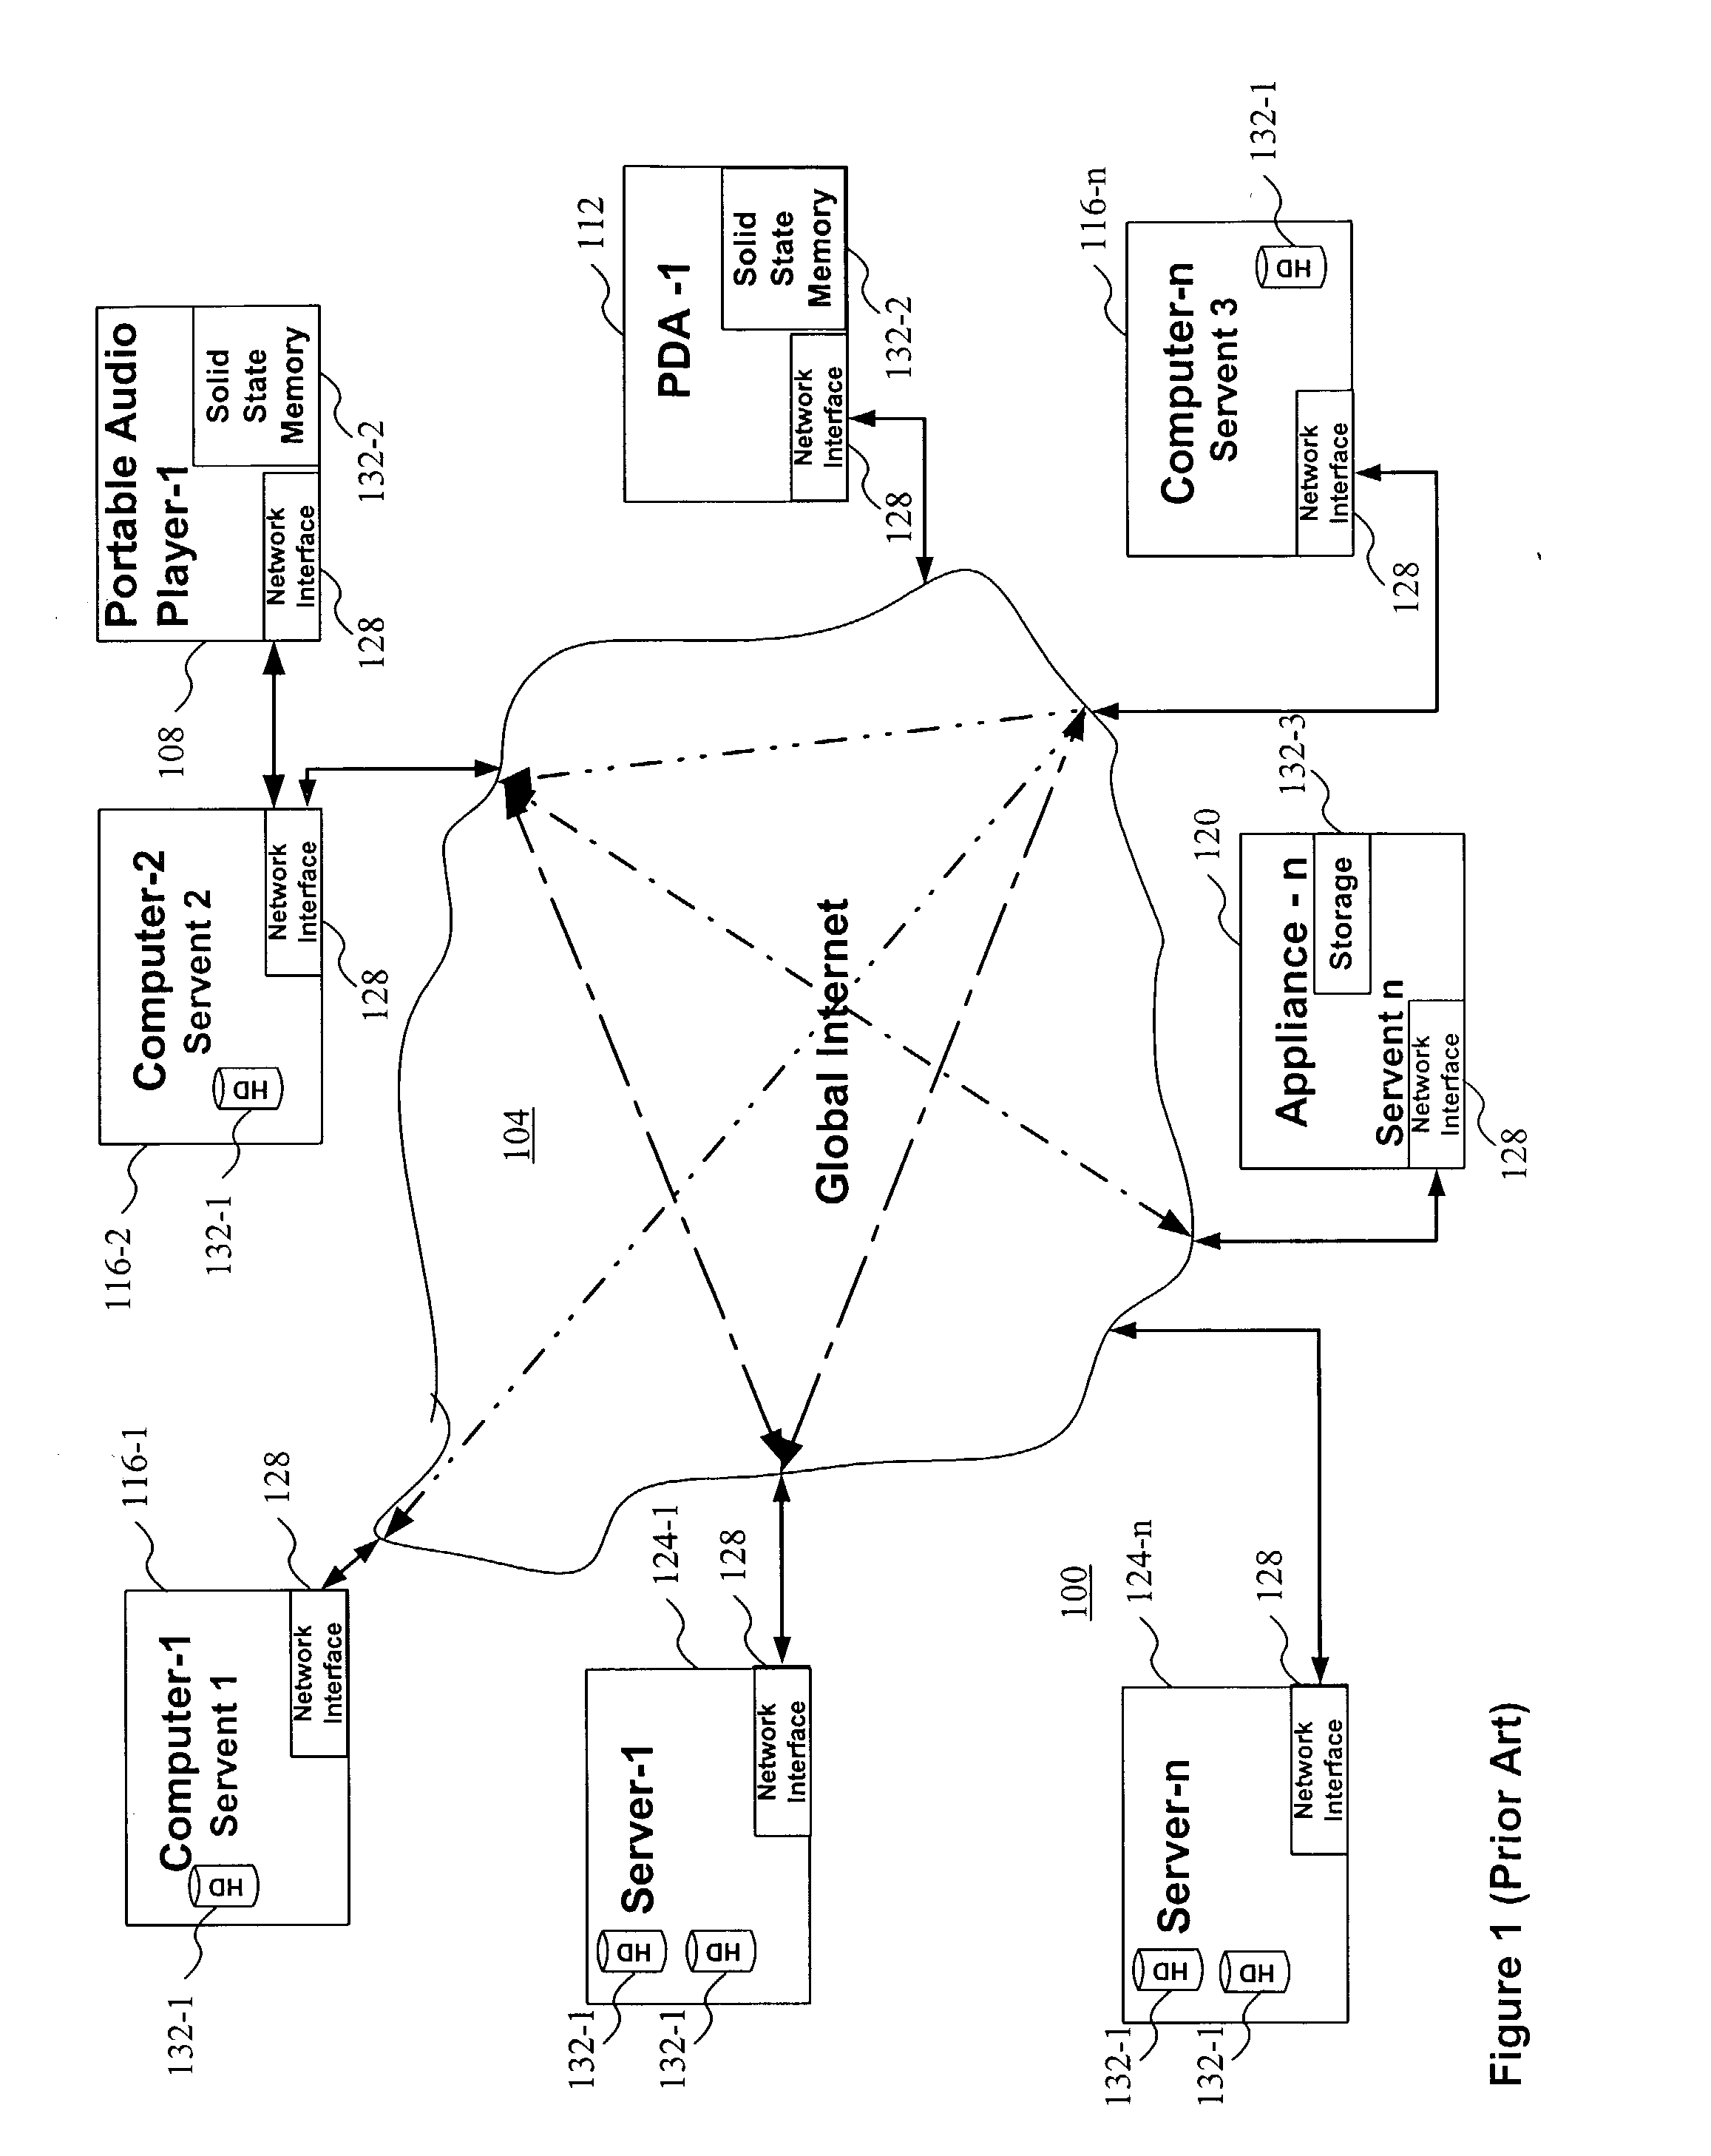 Methods for rights enabled peer-to-peer networking